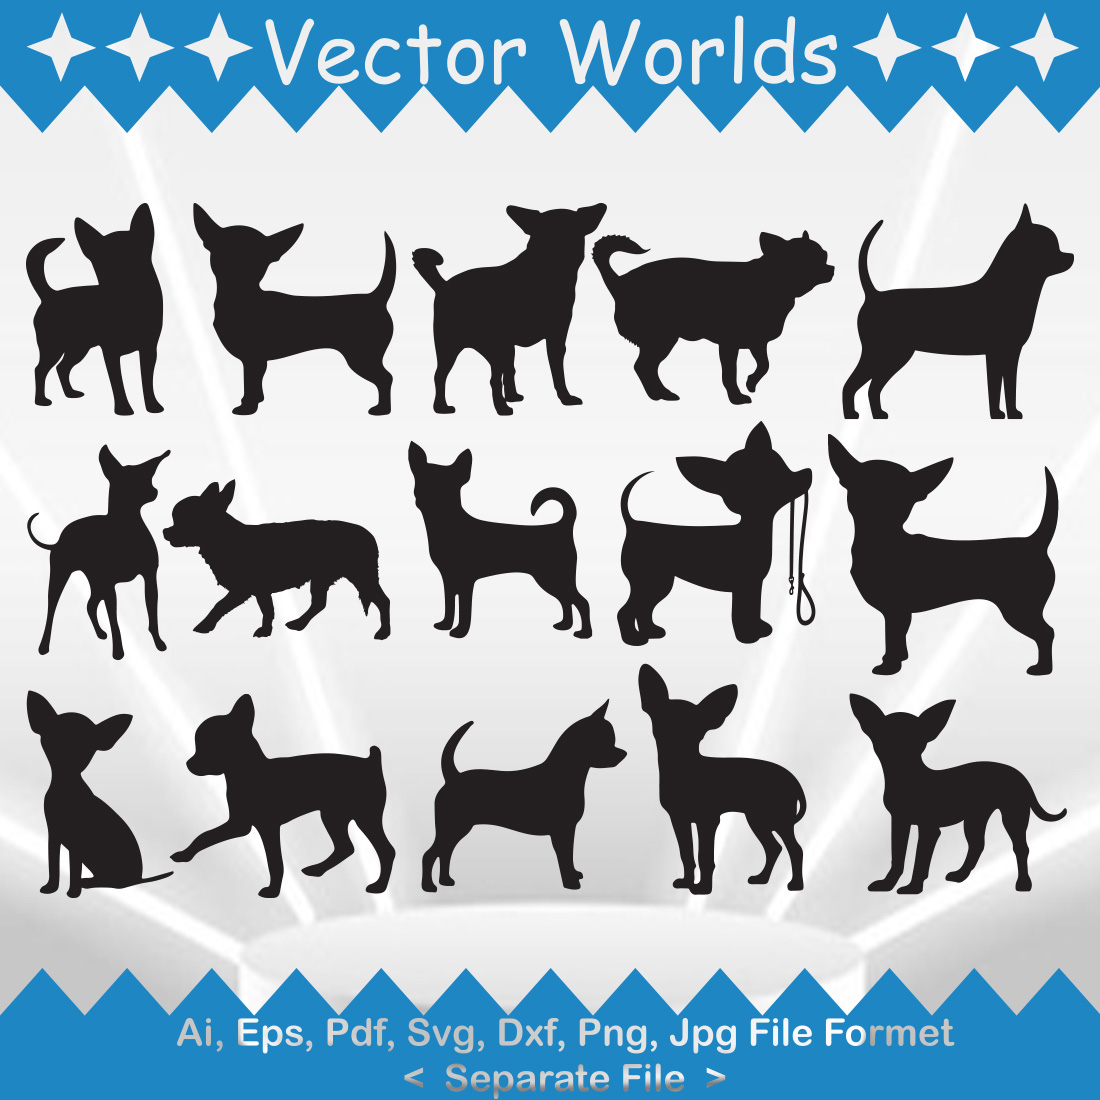 Set of dog silhouettes on a blue and white background.